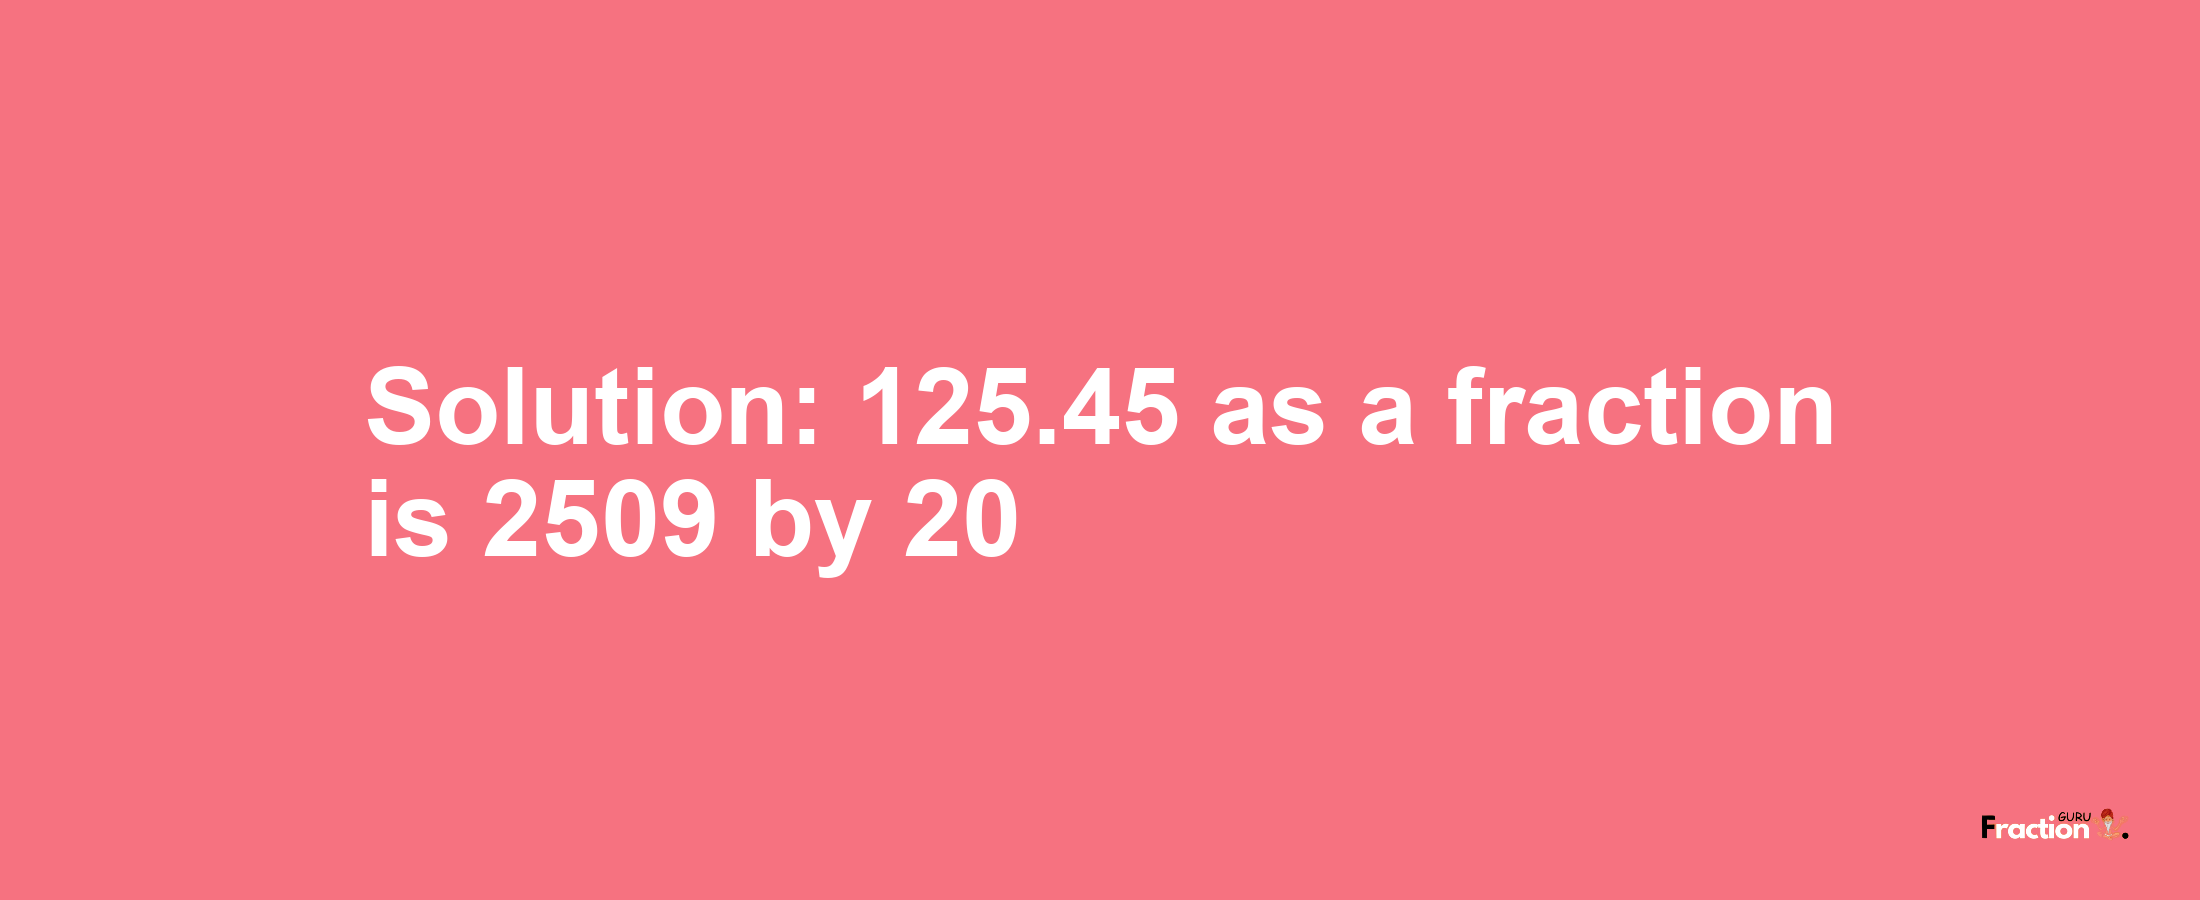 Solution:125.45 as a fraction is 2509/20